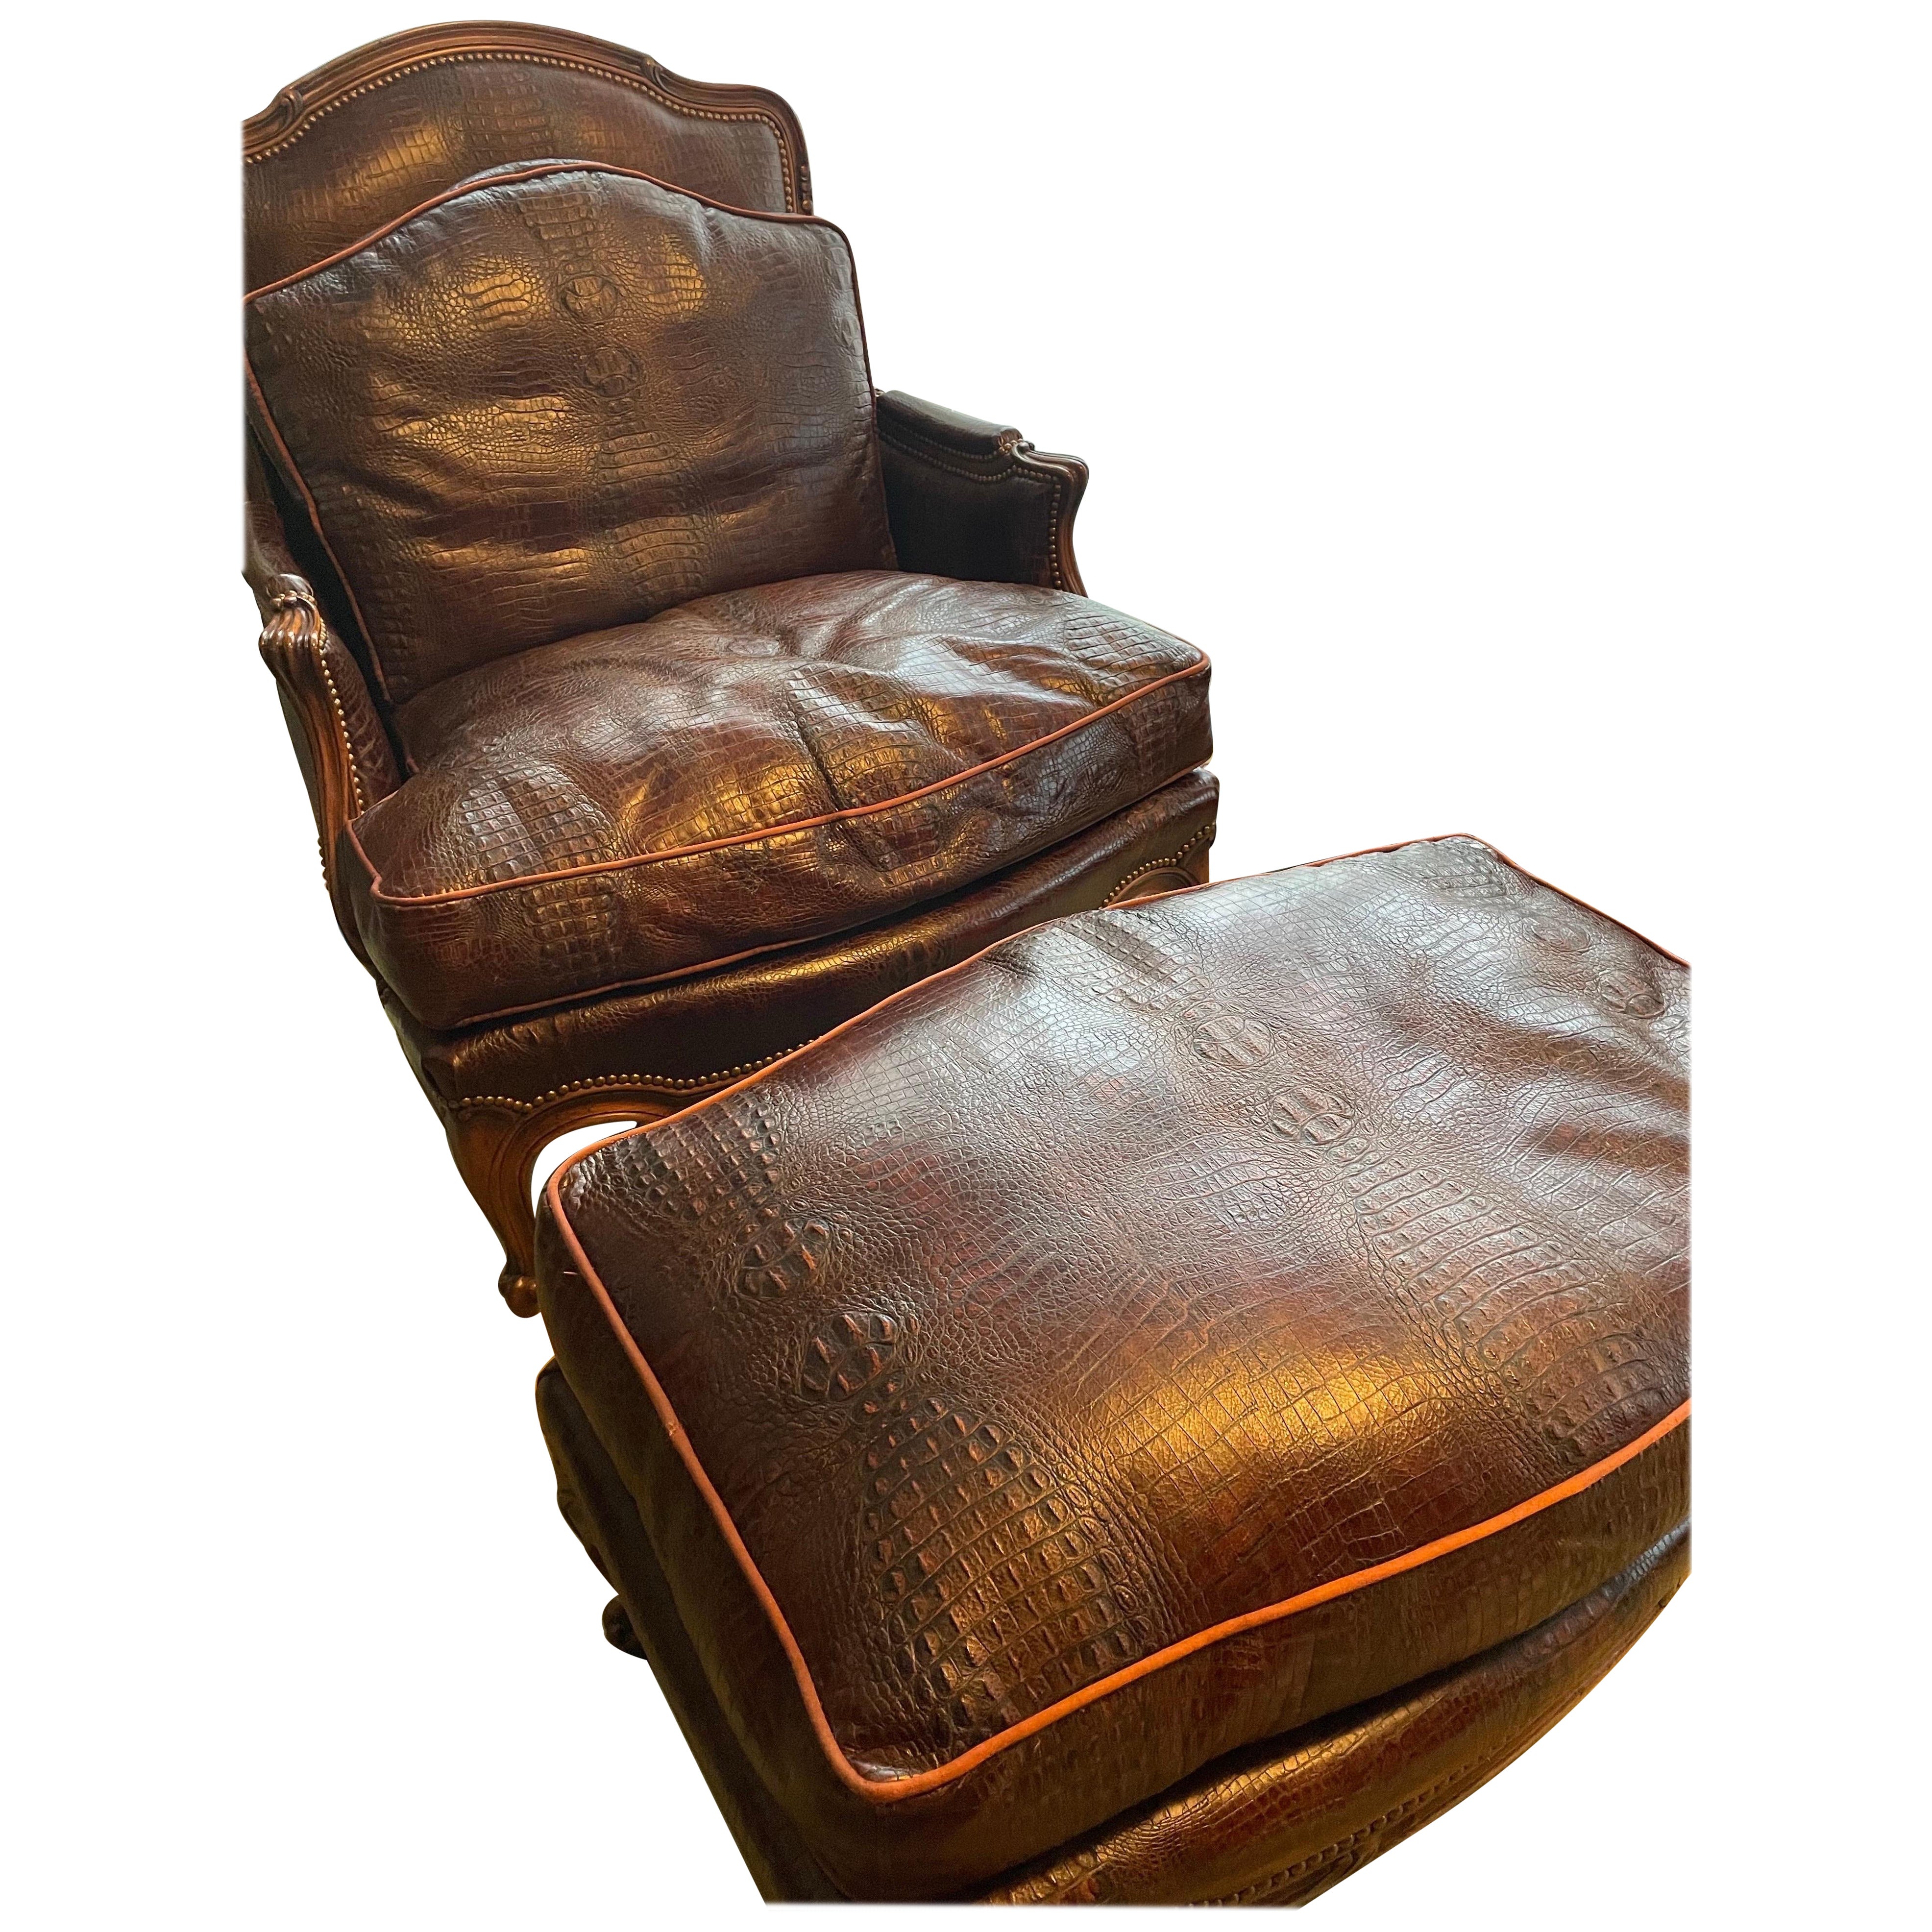 Italian Armchair , With Ottoman in Brown Leather Crocodile Made in Italy , The Finest Furniture. Beautiful And Rare Armchair and Ottoman .